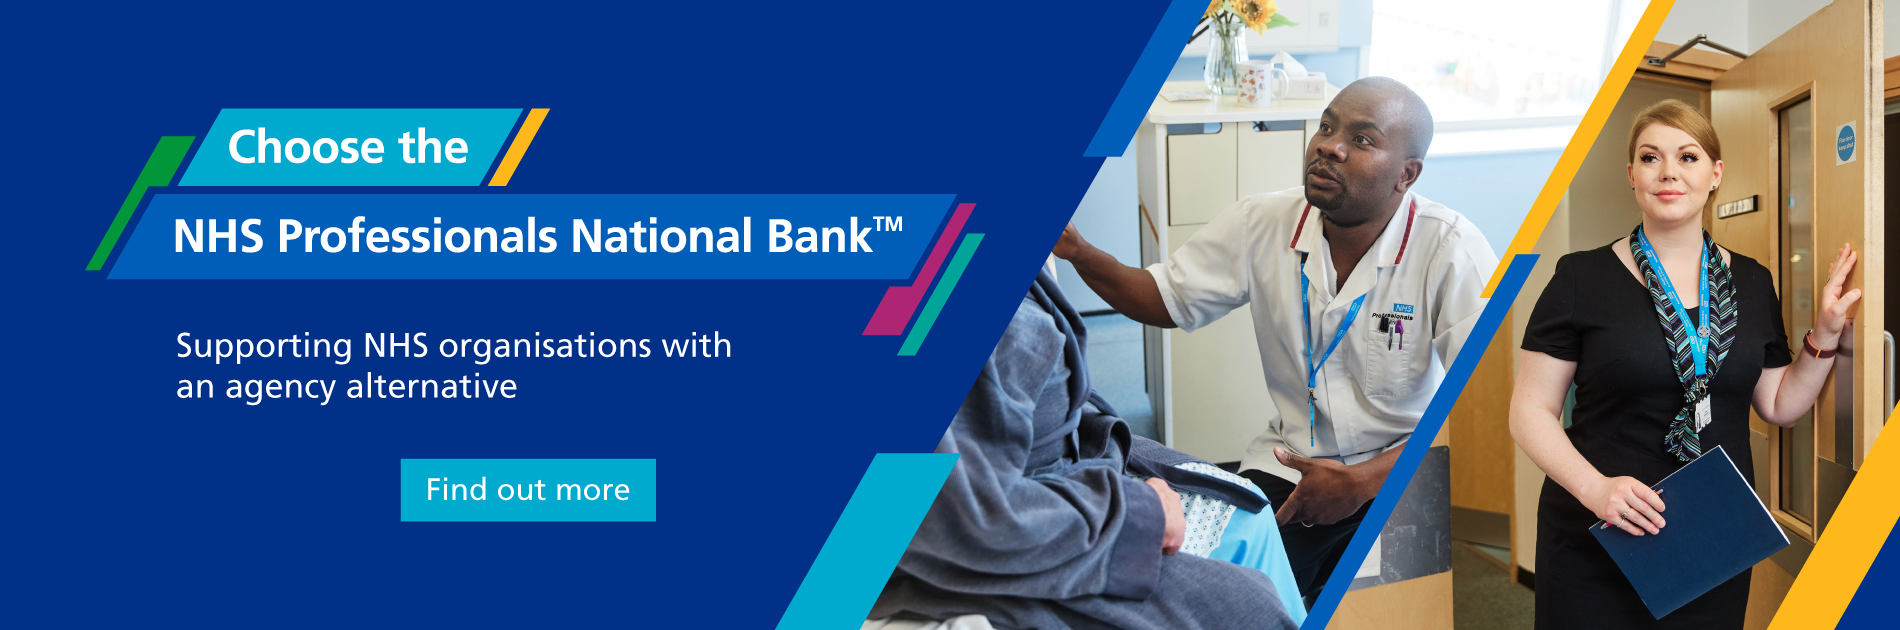 Choose the NHS Professionals National Bank